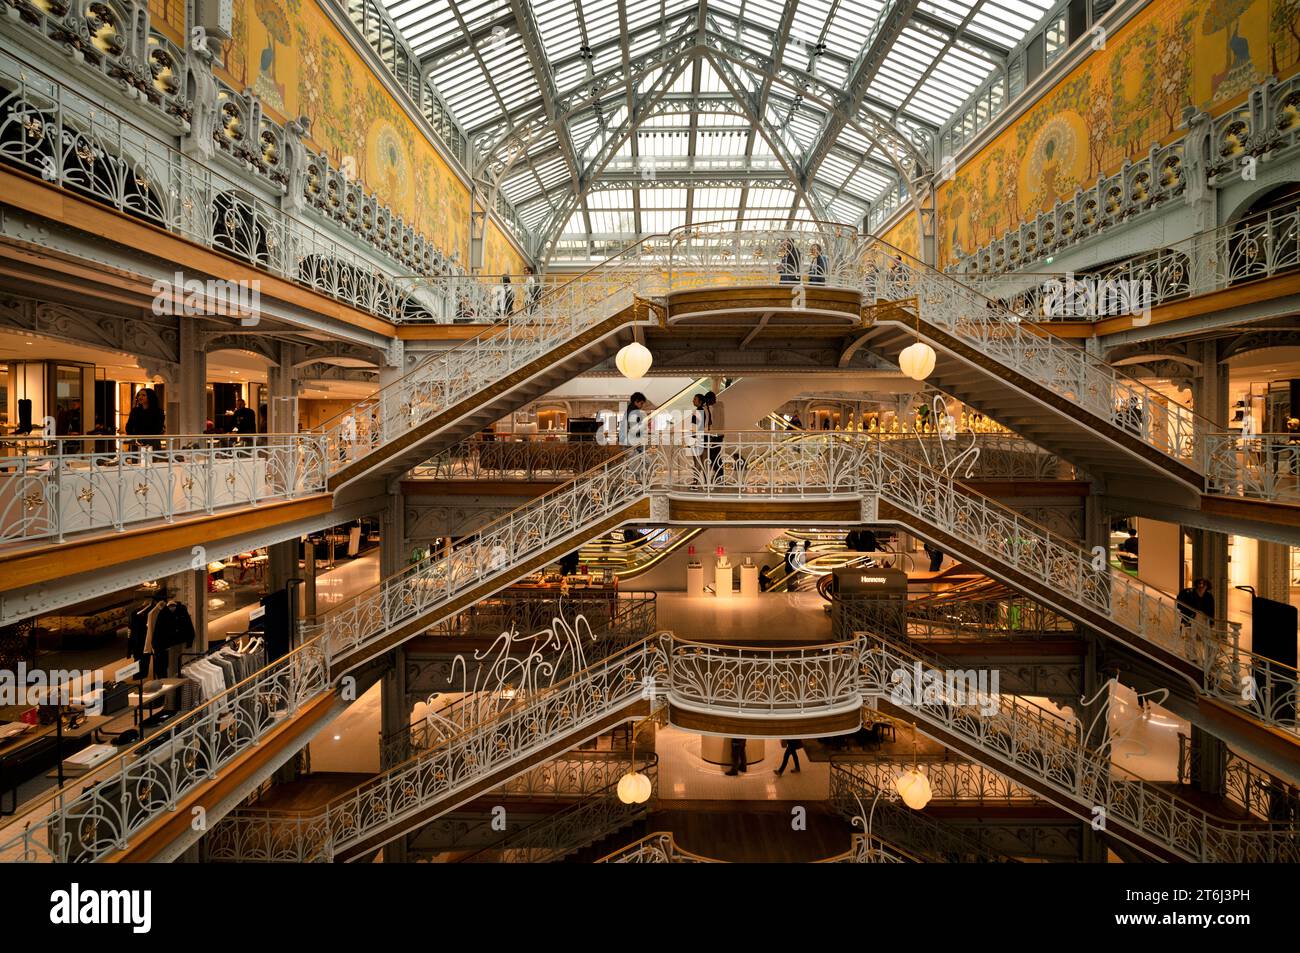 interior, staircase, shopping floors, glass dome, La Samaritaine, exclusive department store, Paris, France Stock Photo